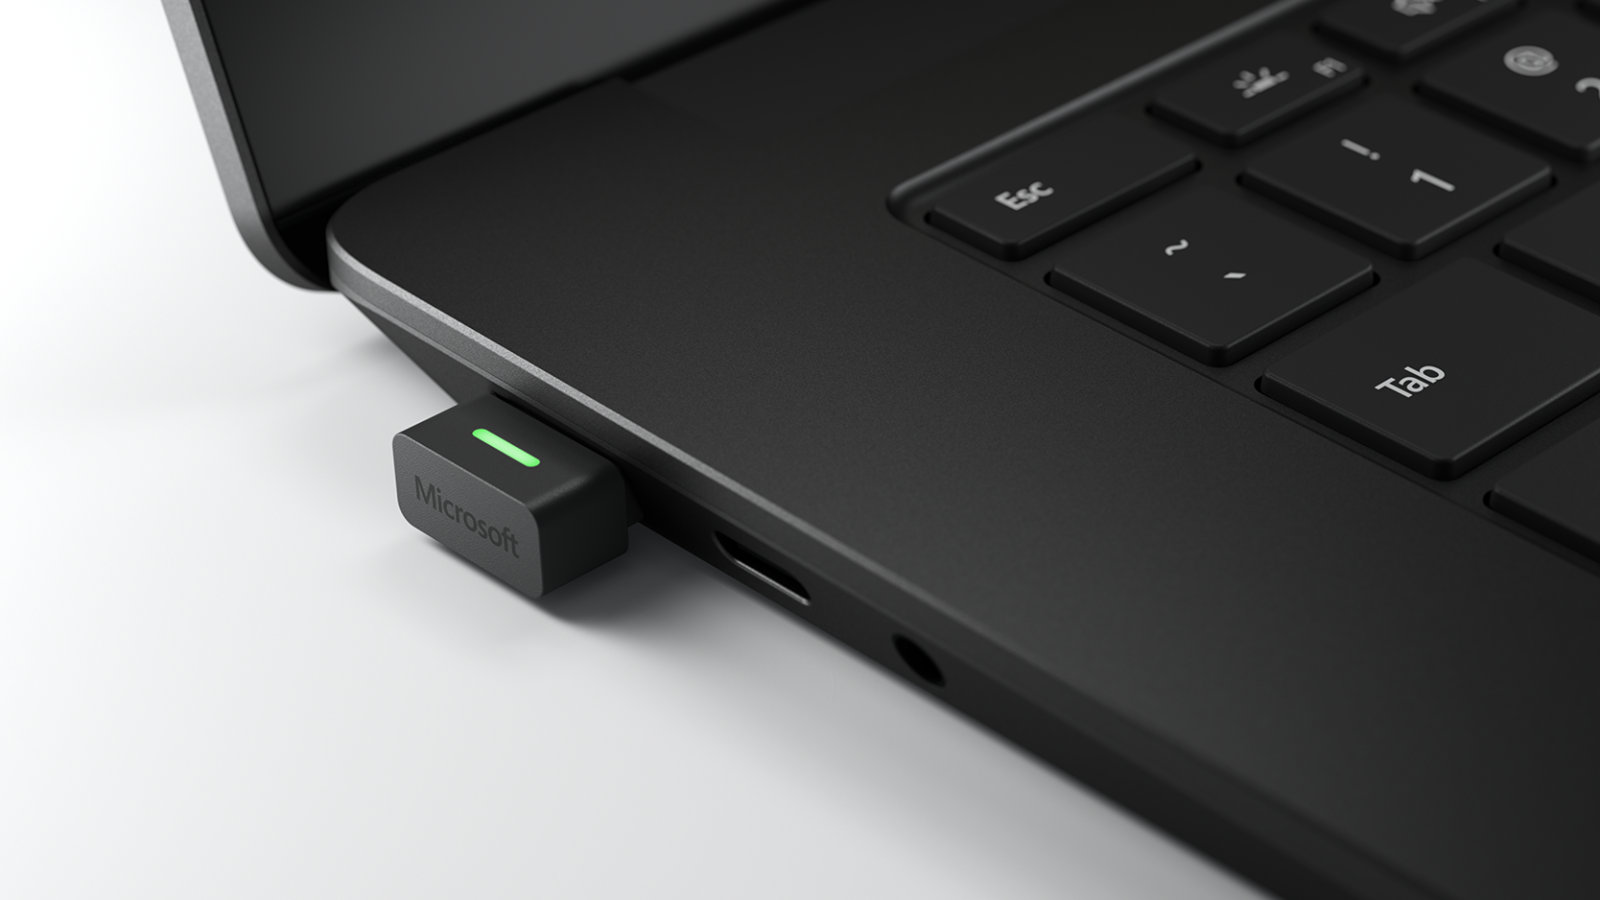 A close-up view of the USB Link connected to a Surface Pro 7+ device